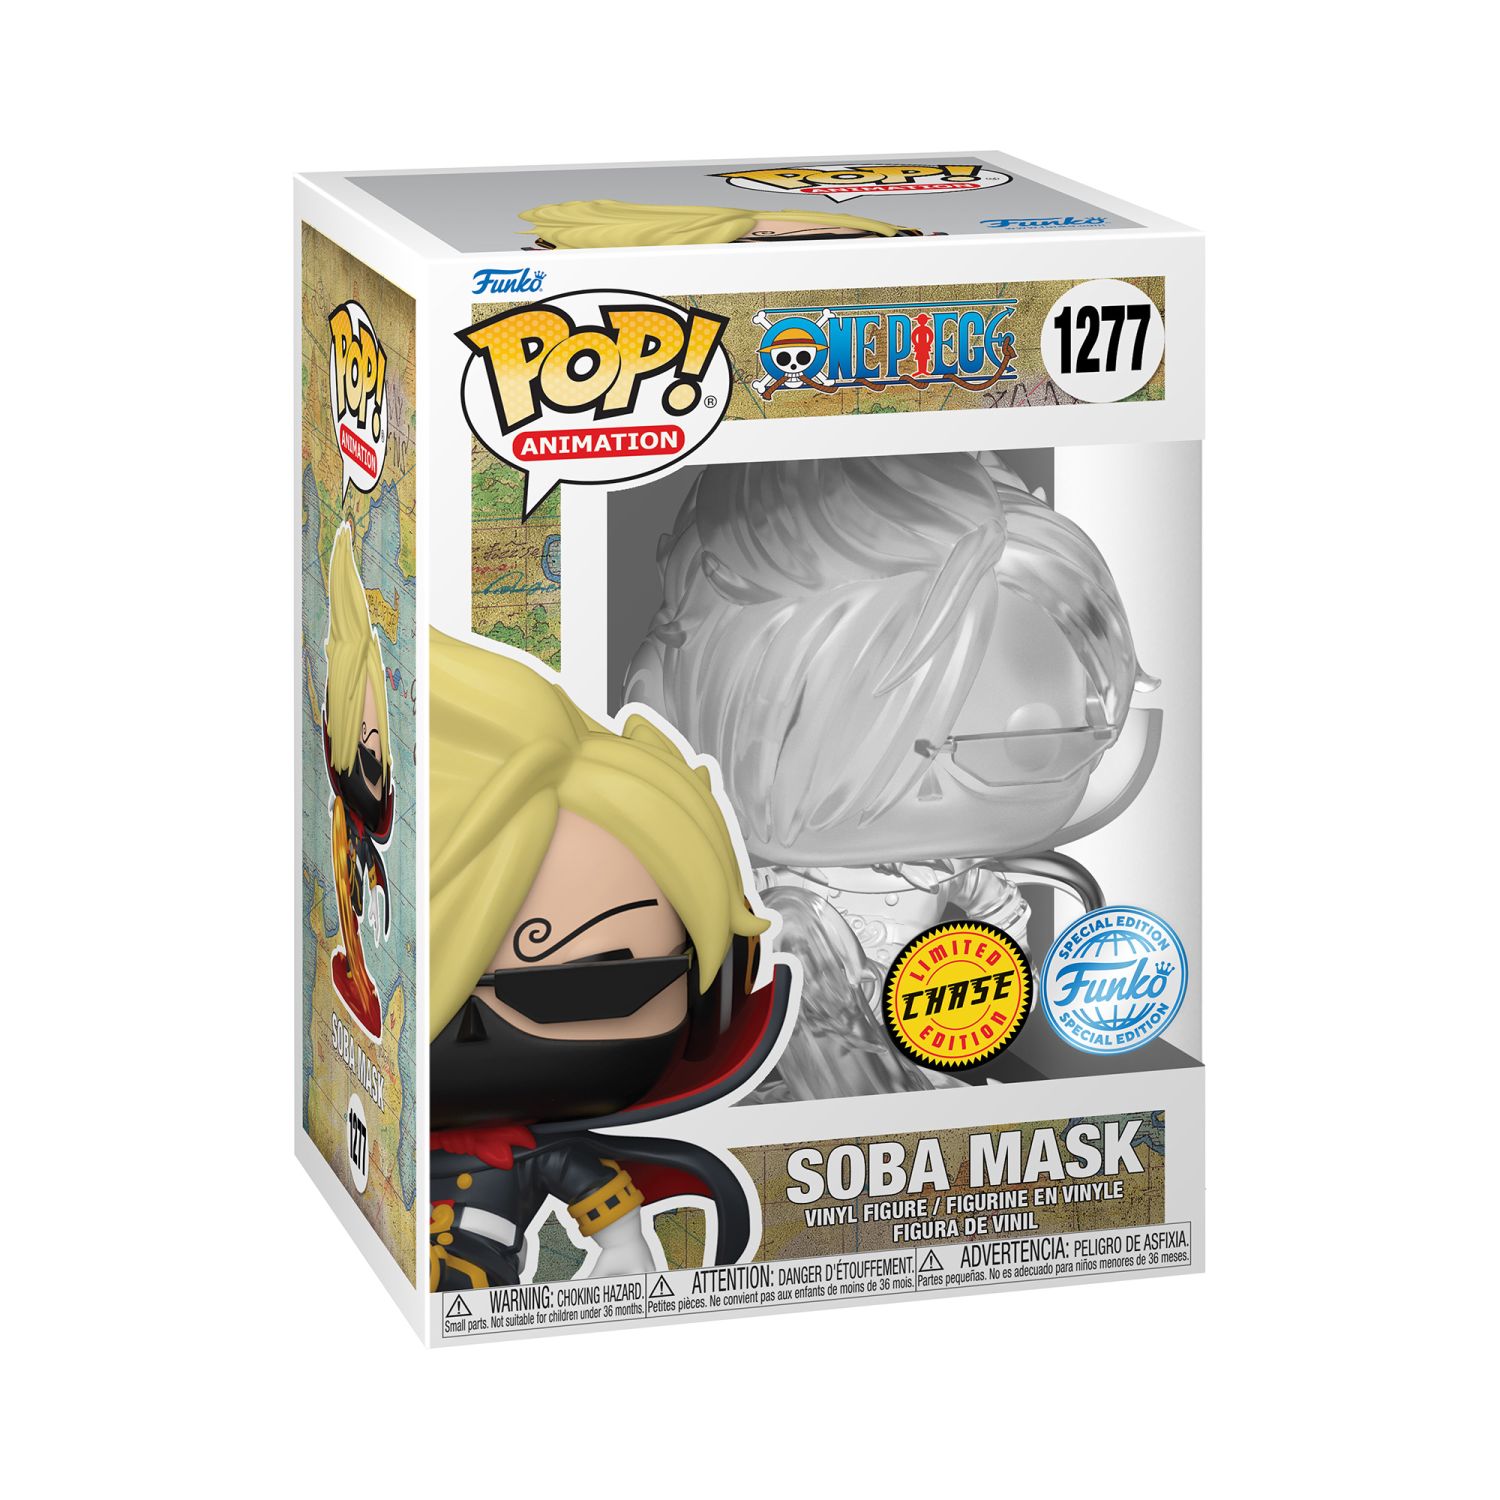 There is a 1 in 6 chance you may find the translucent chase of invisible Pop! Soba Mask. Vinyl figure is approximately 10Cm tall.